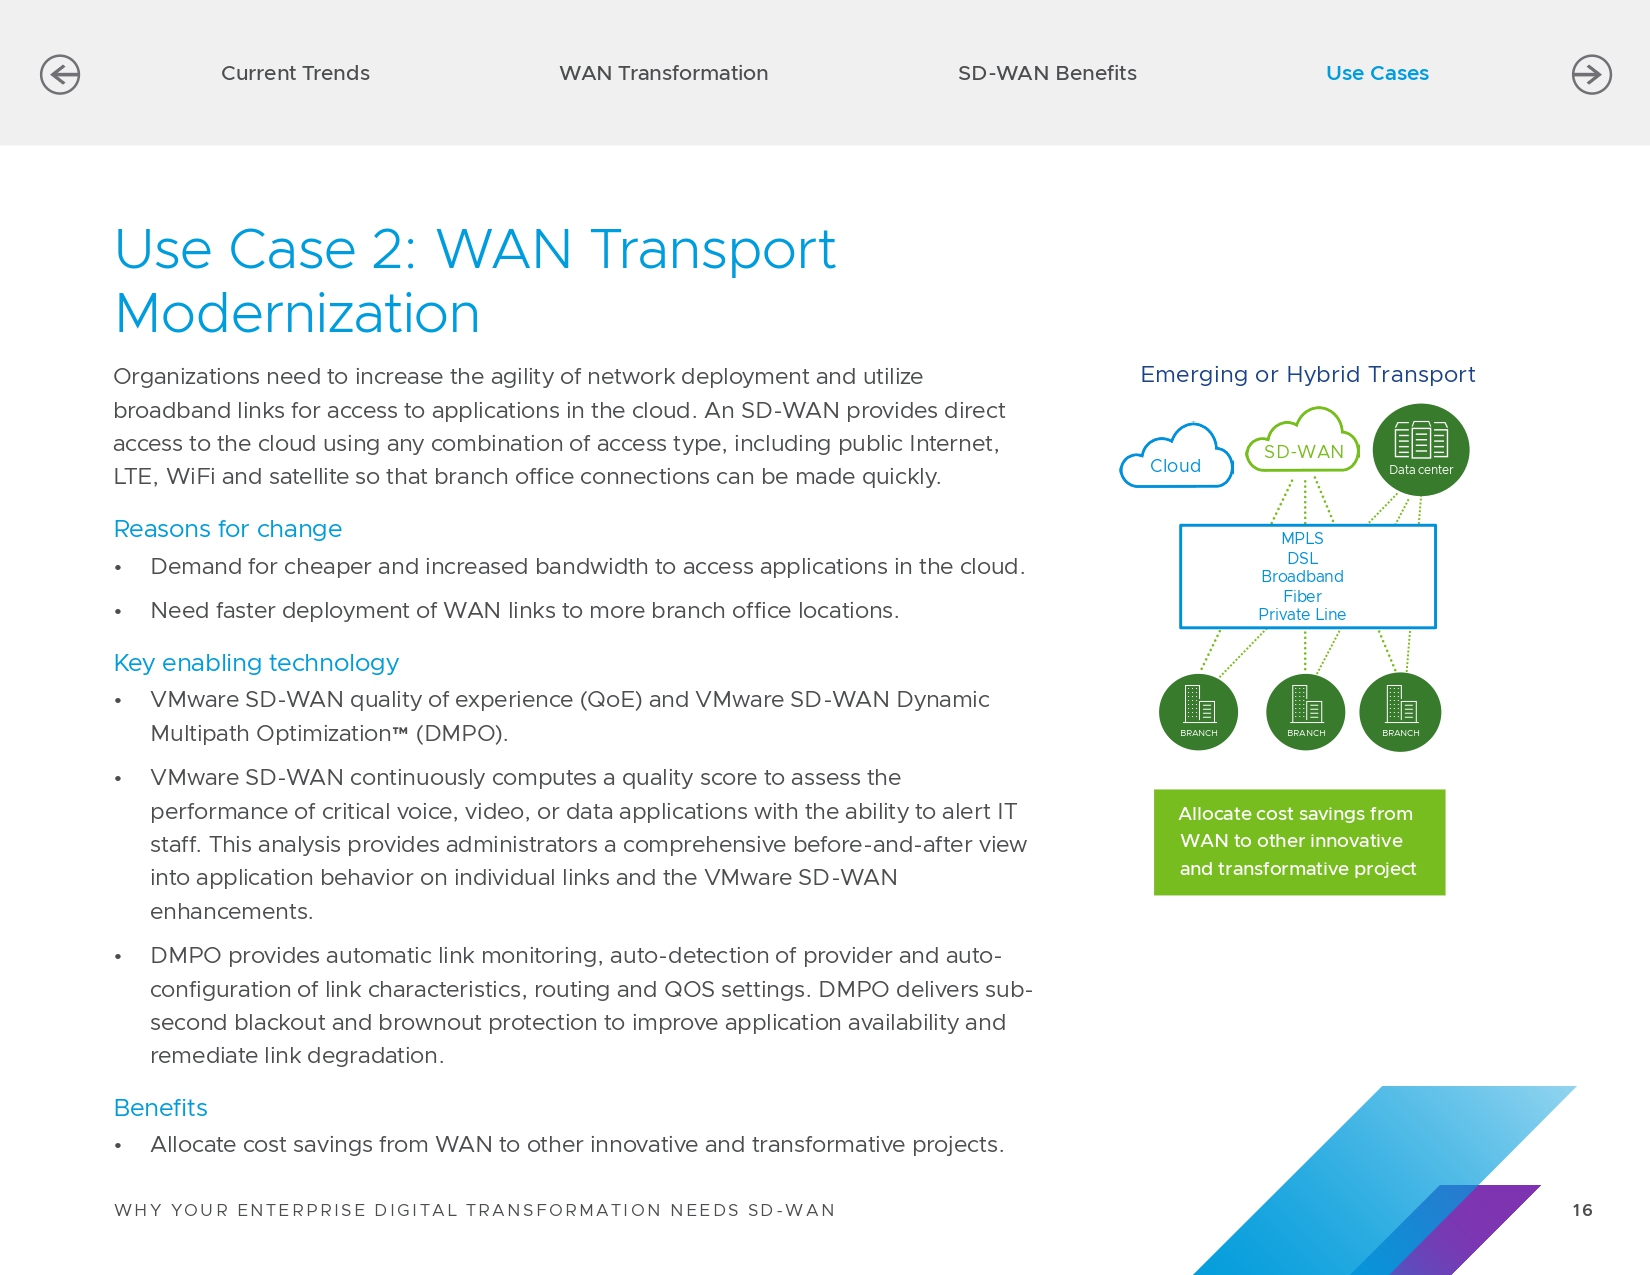 +211431_NEW_Co-branded_CBTS_Why_Your_Enterprise_Digital_Transformation_Needs_SD-WAN-e-book_page-0016